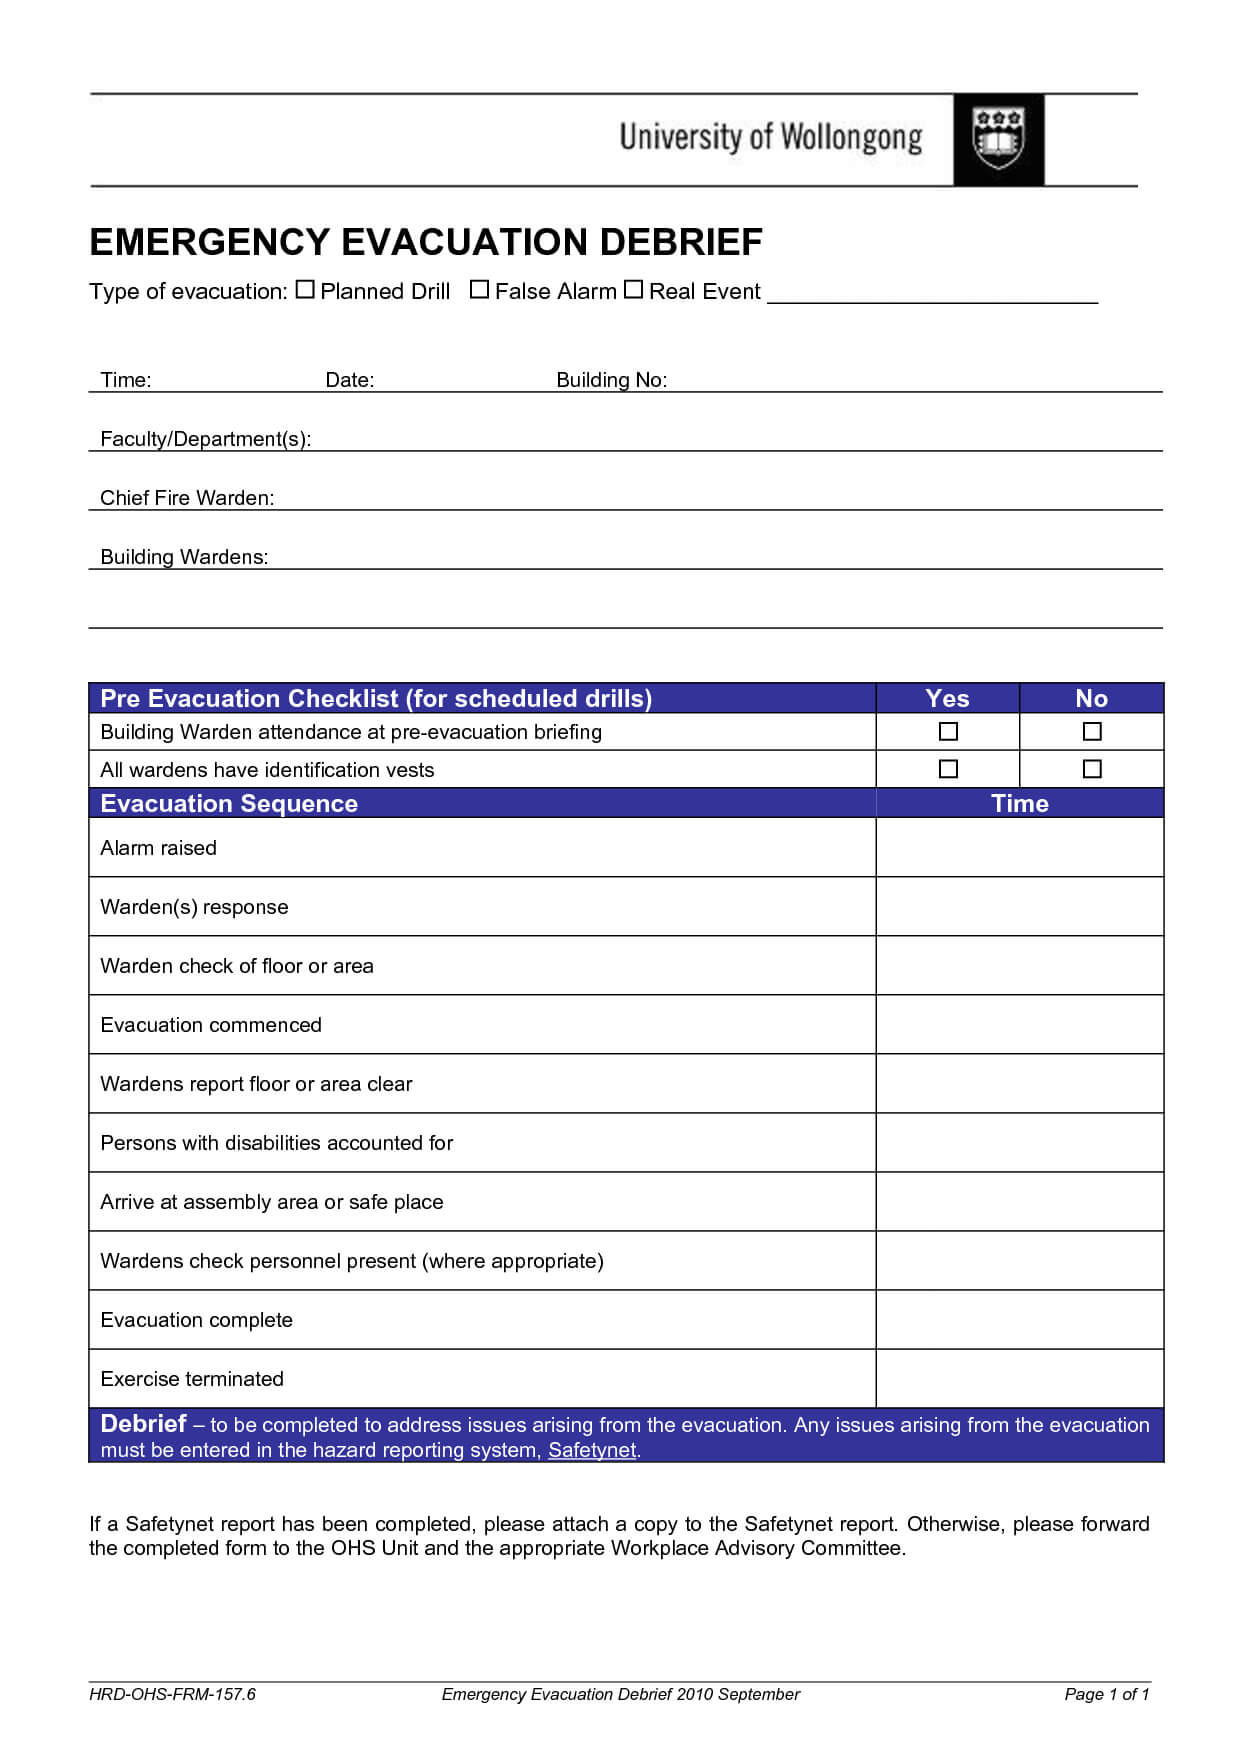 Hospital Debriefing Form Template With Regard To Event Debrief Report Template